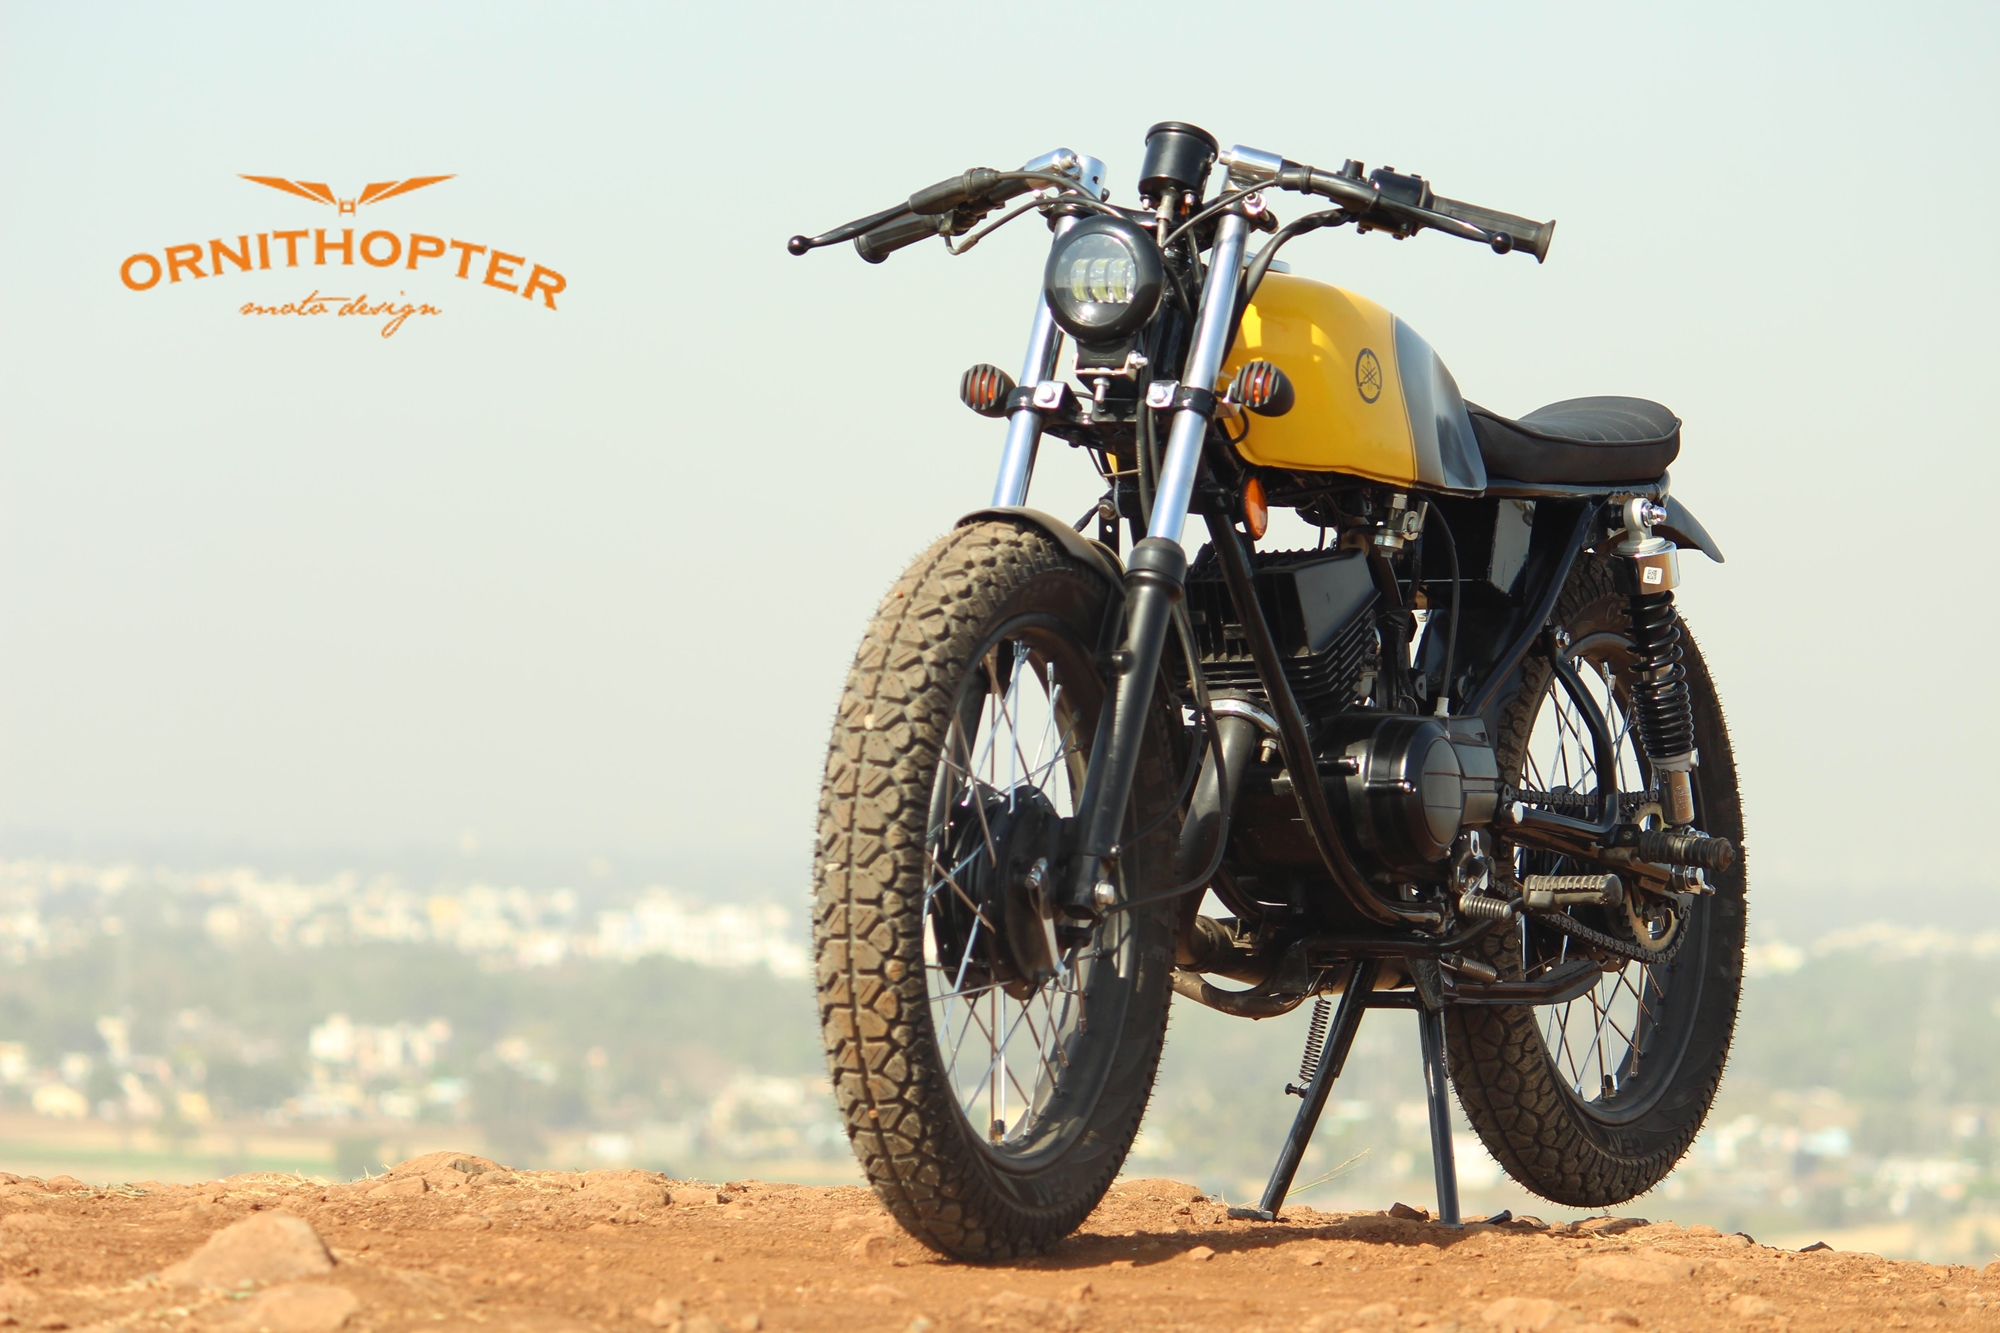 Modified Yamaha Rx100 By Ornithopter Is A Scrambler Cafe Racer